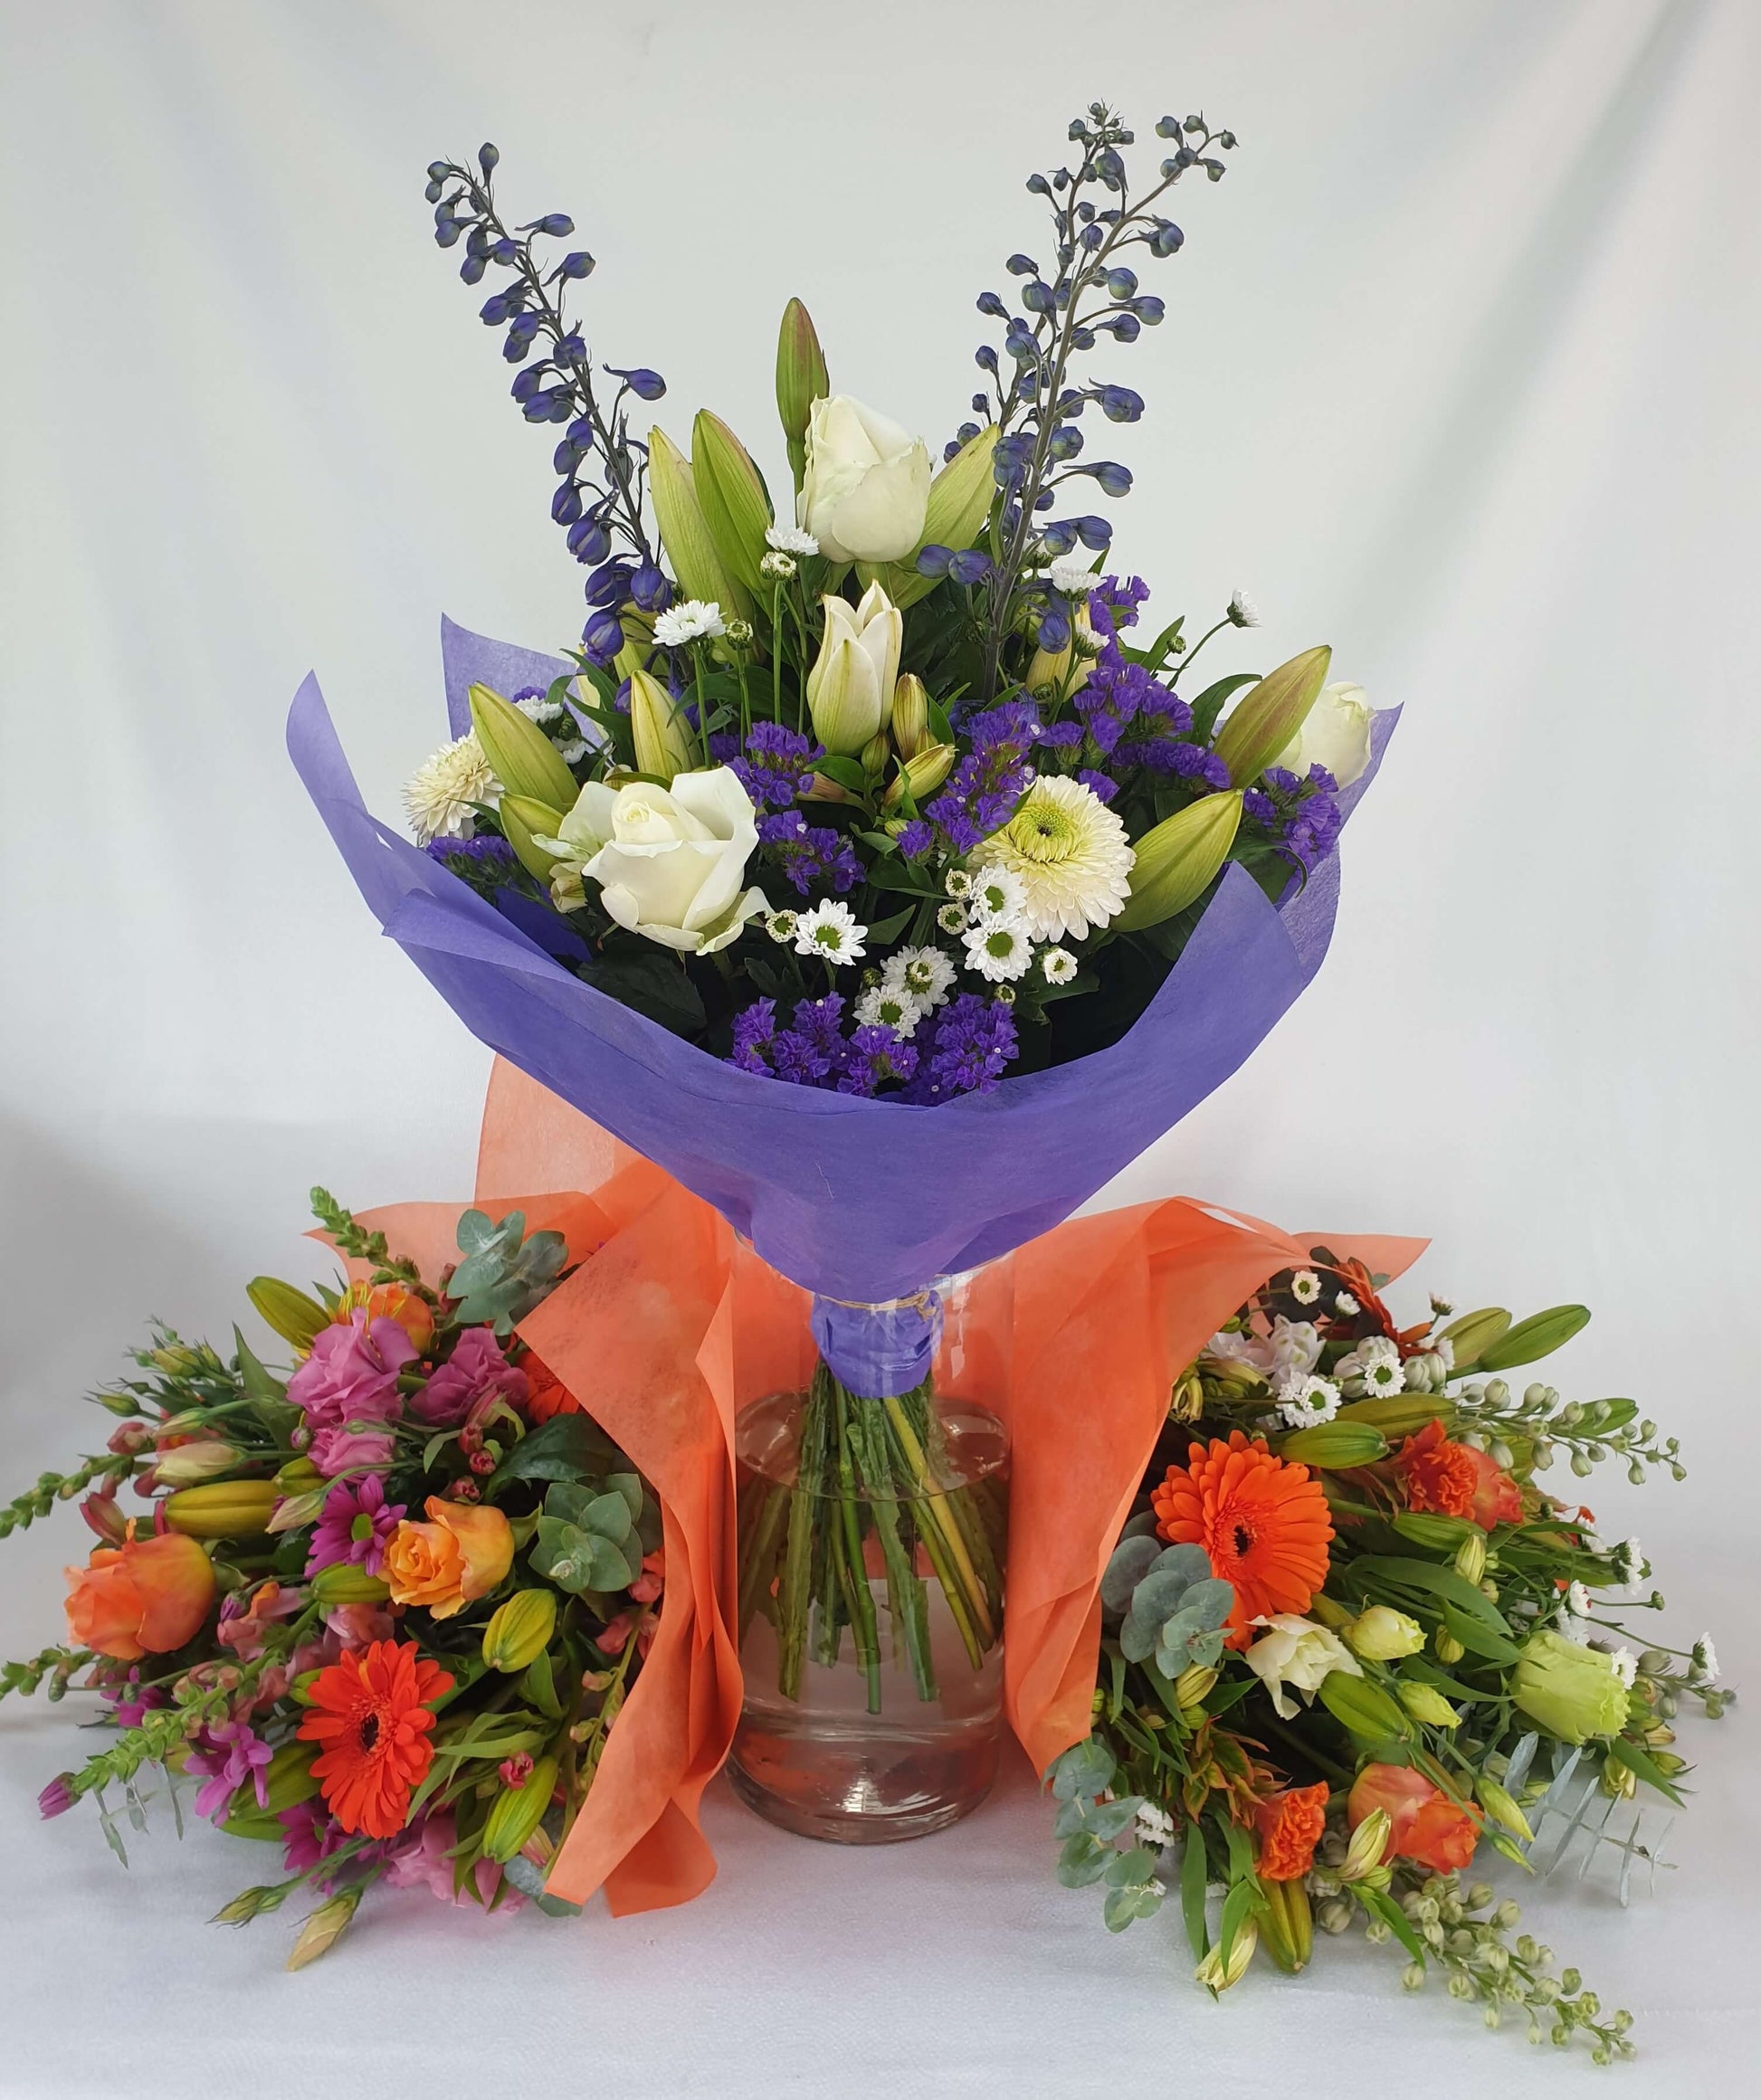 Three bouquets showing what you can get in our subscription offer.